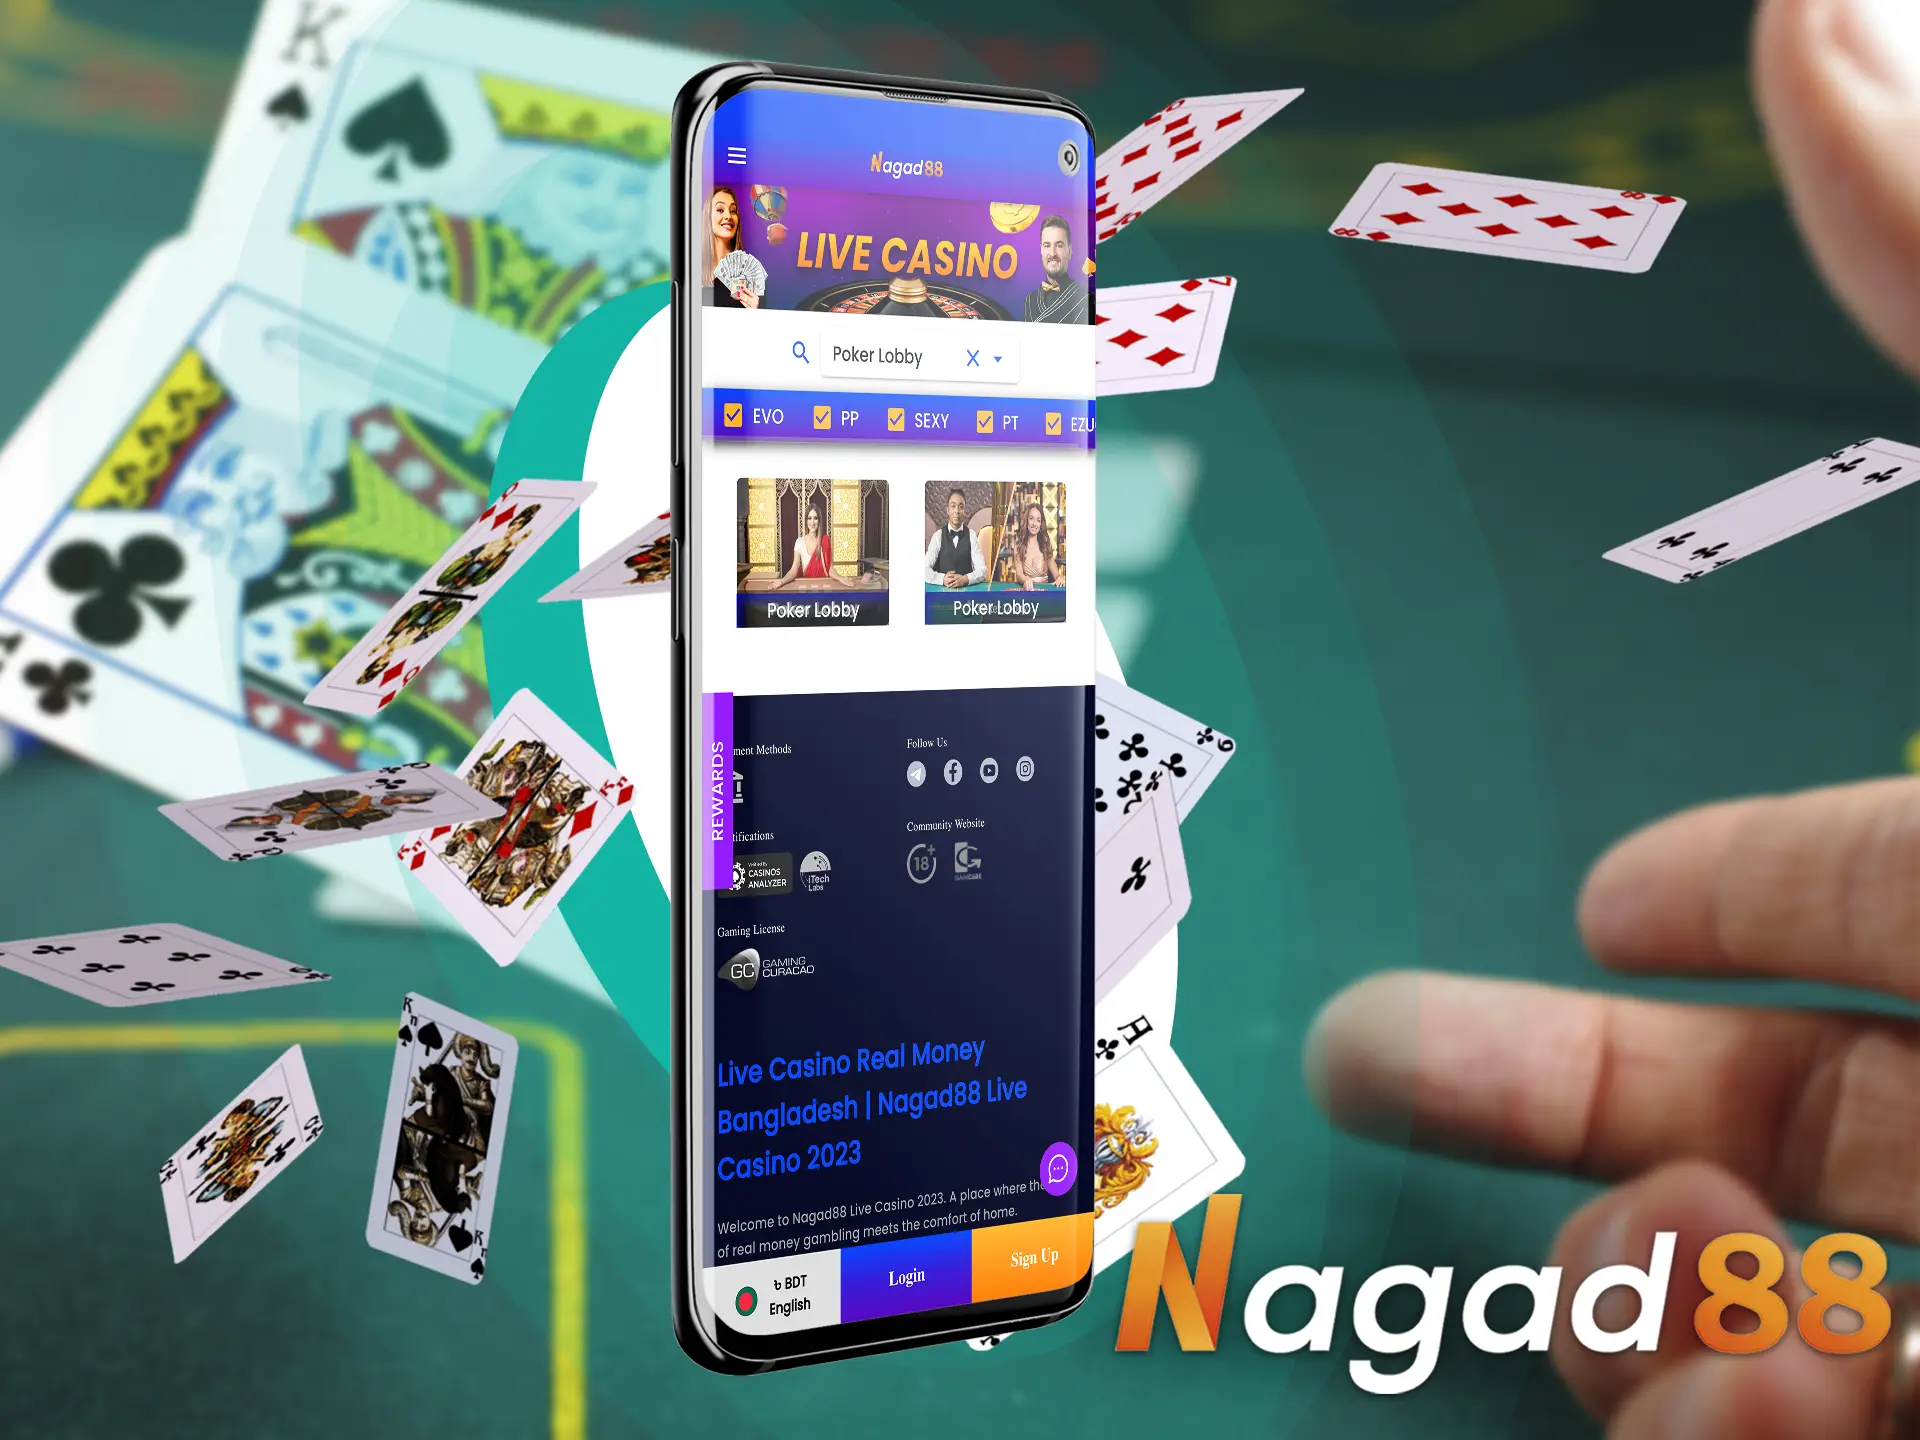 Players from Bangladesh can play the world's most popular online poker game.